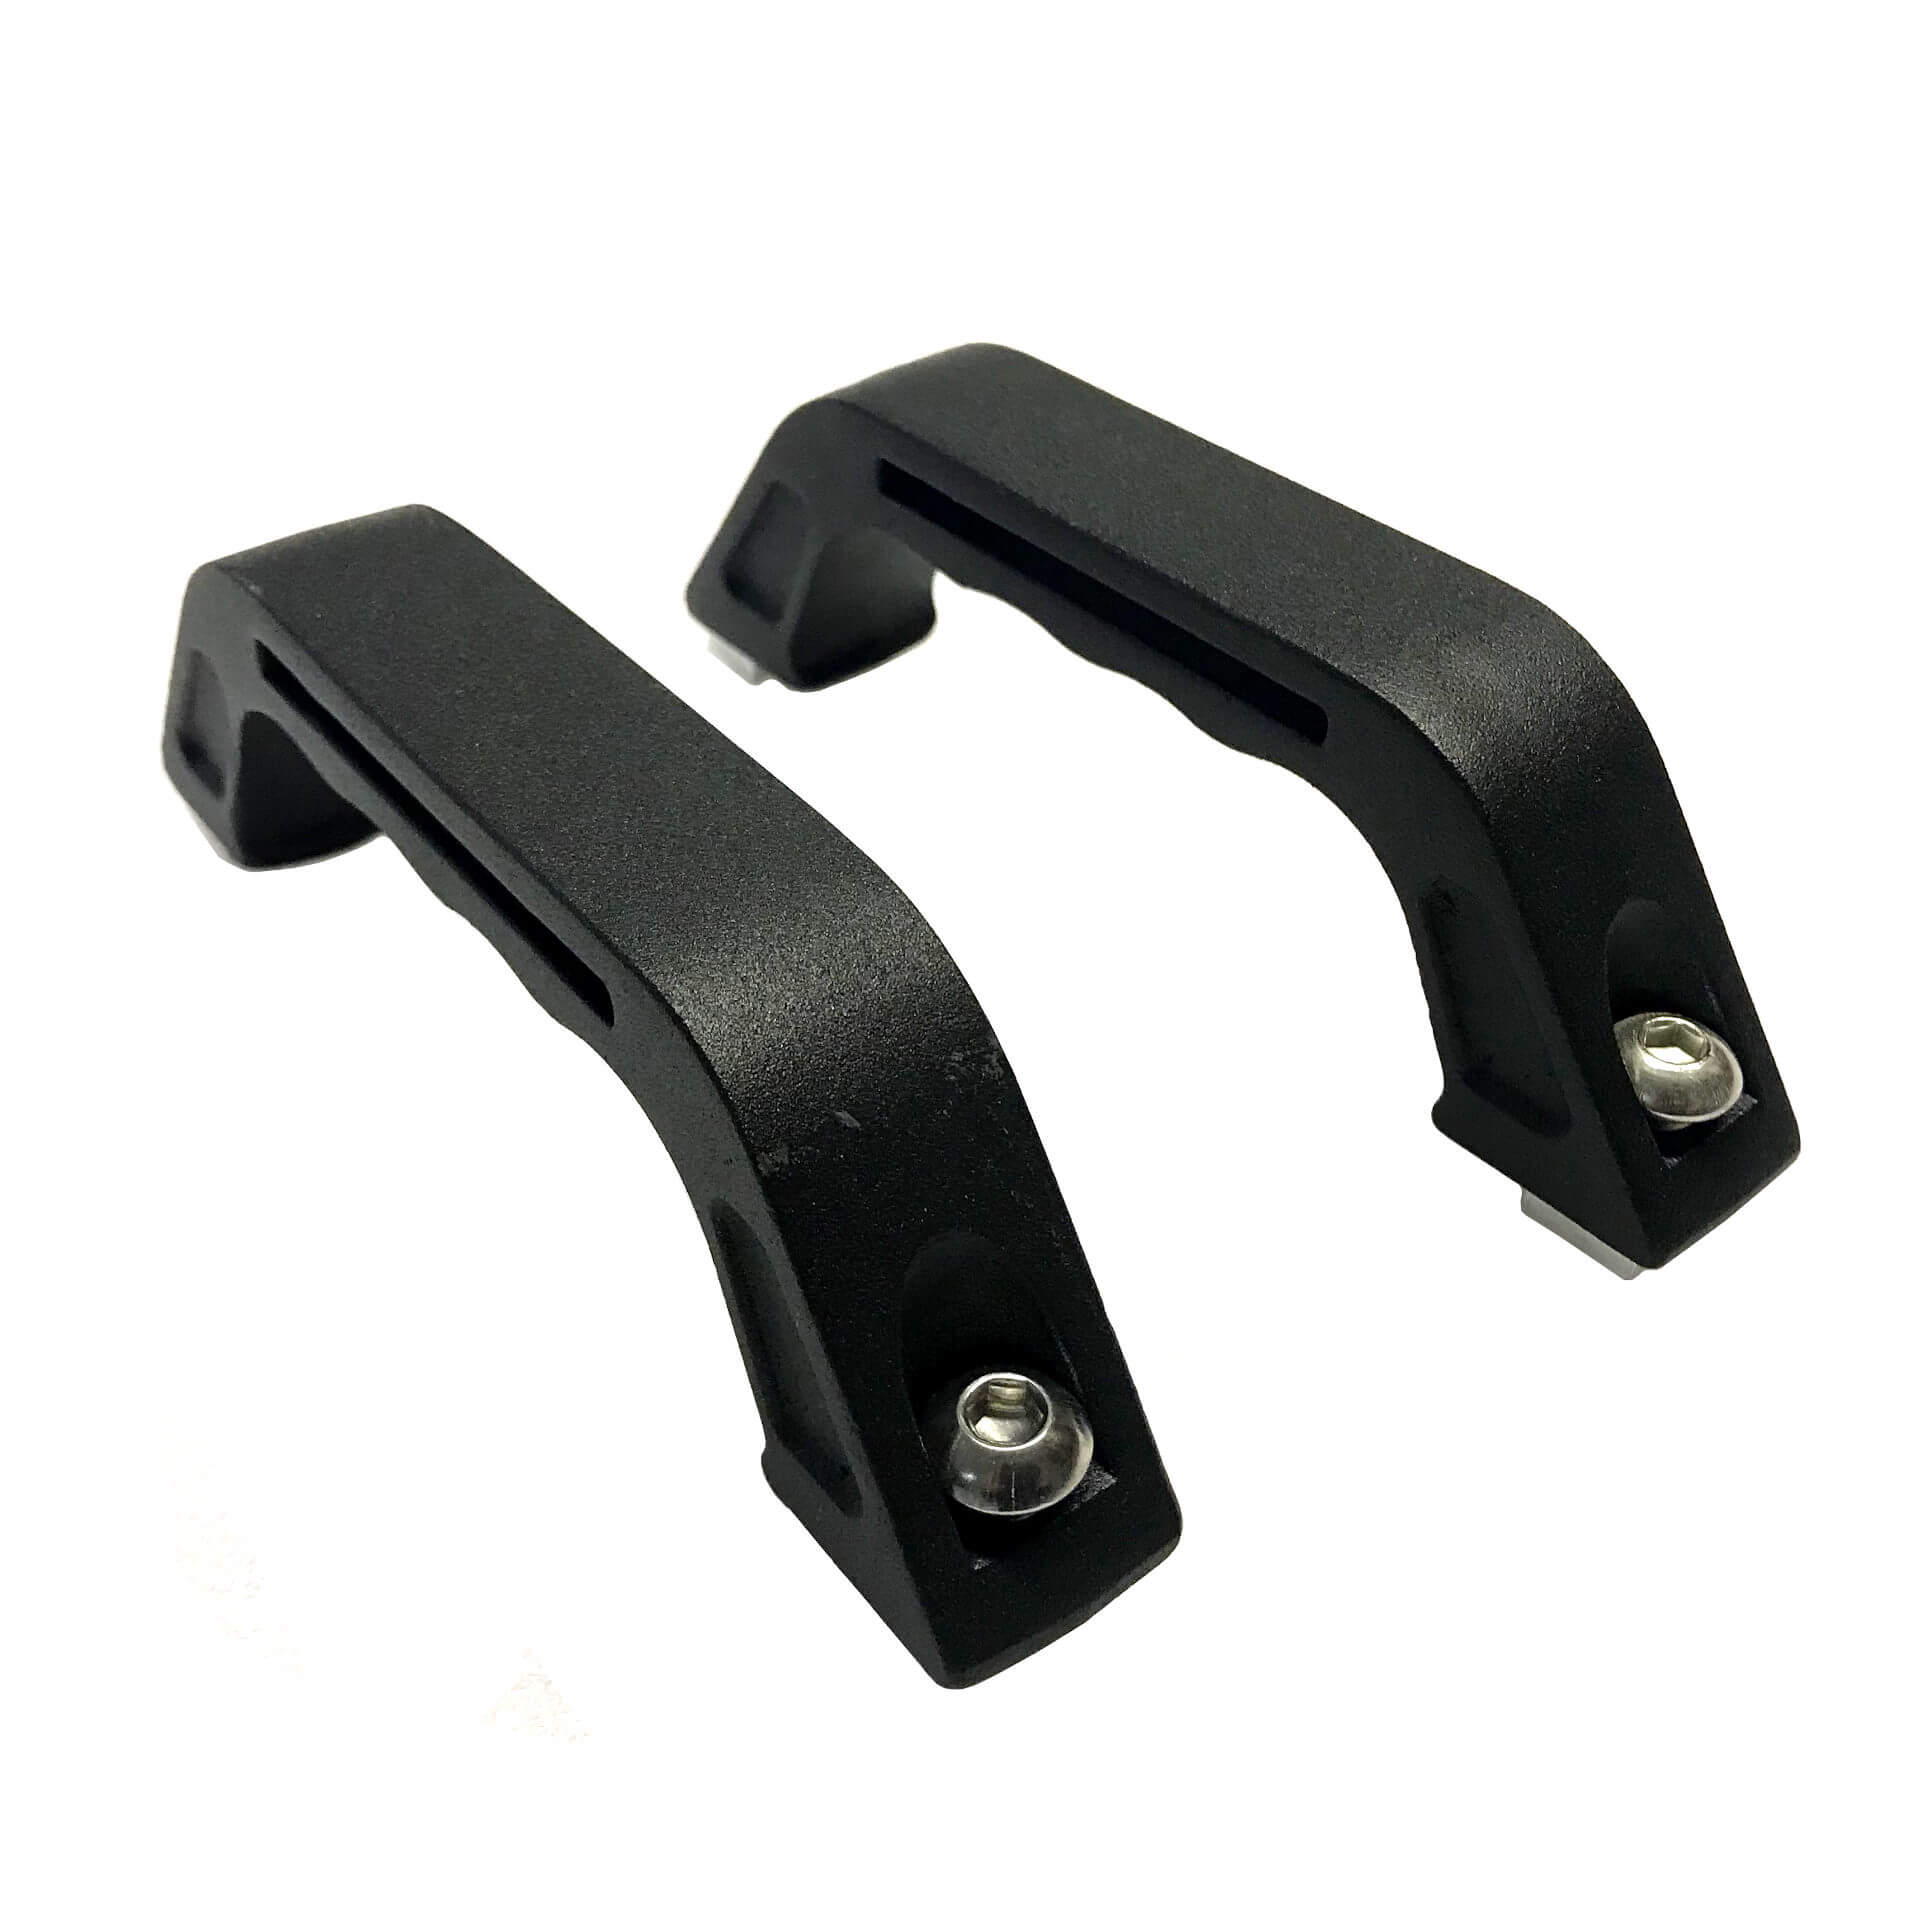 Aluminium Grab Handle for Direct4x4 AluMod Low Profile Roof Racks -  - sold by Direct4x4